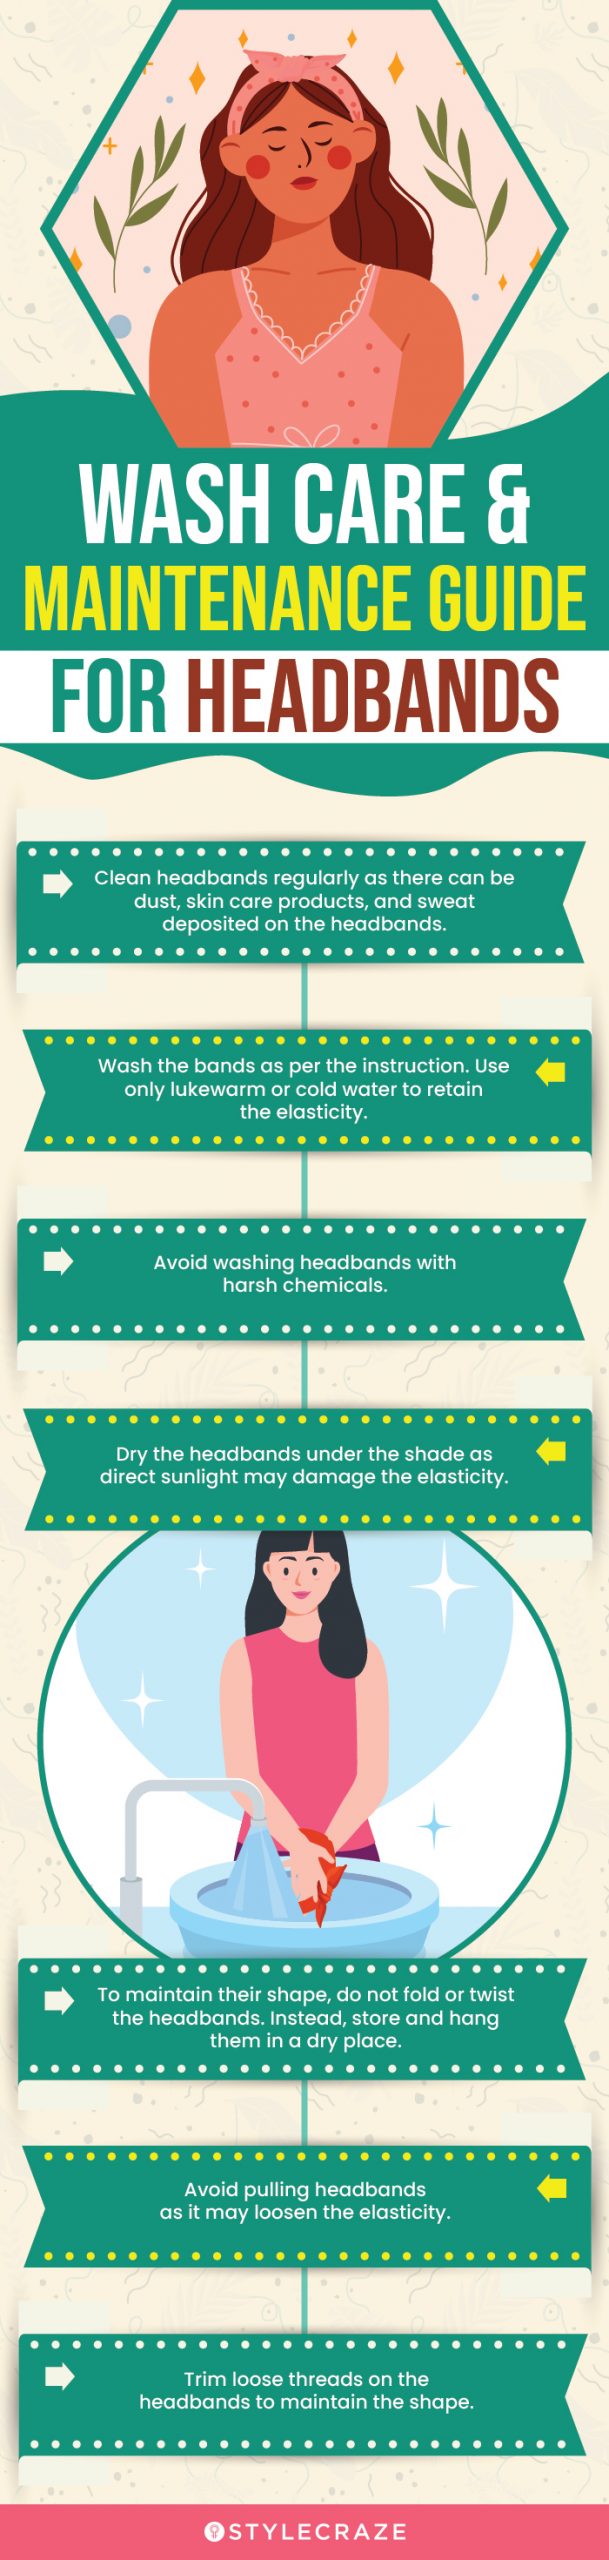 Wash Care & Maintenance Guide For Headbands (infographic)